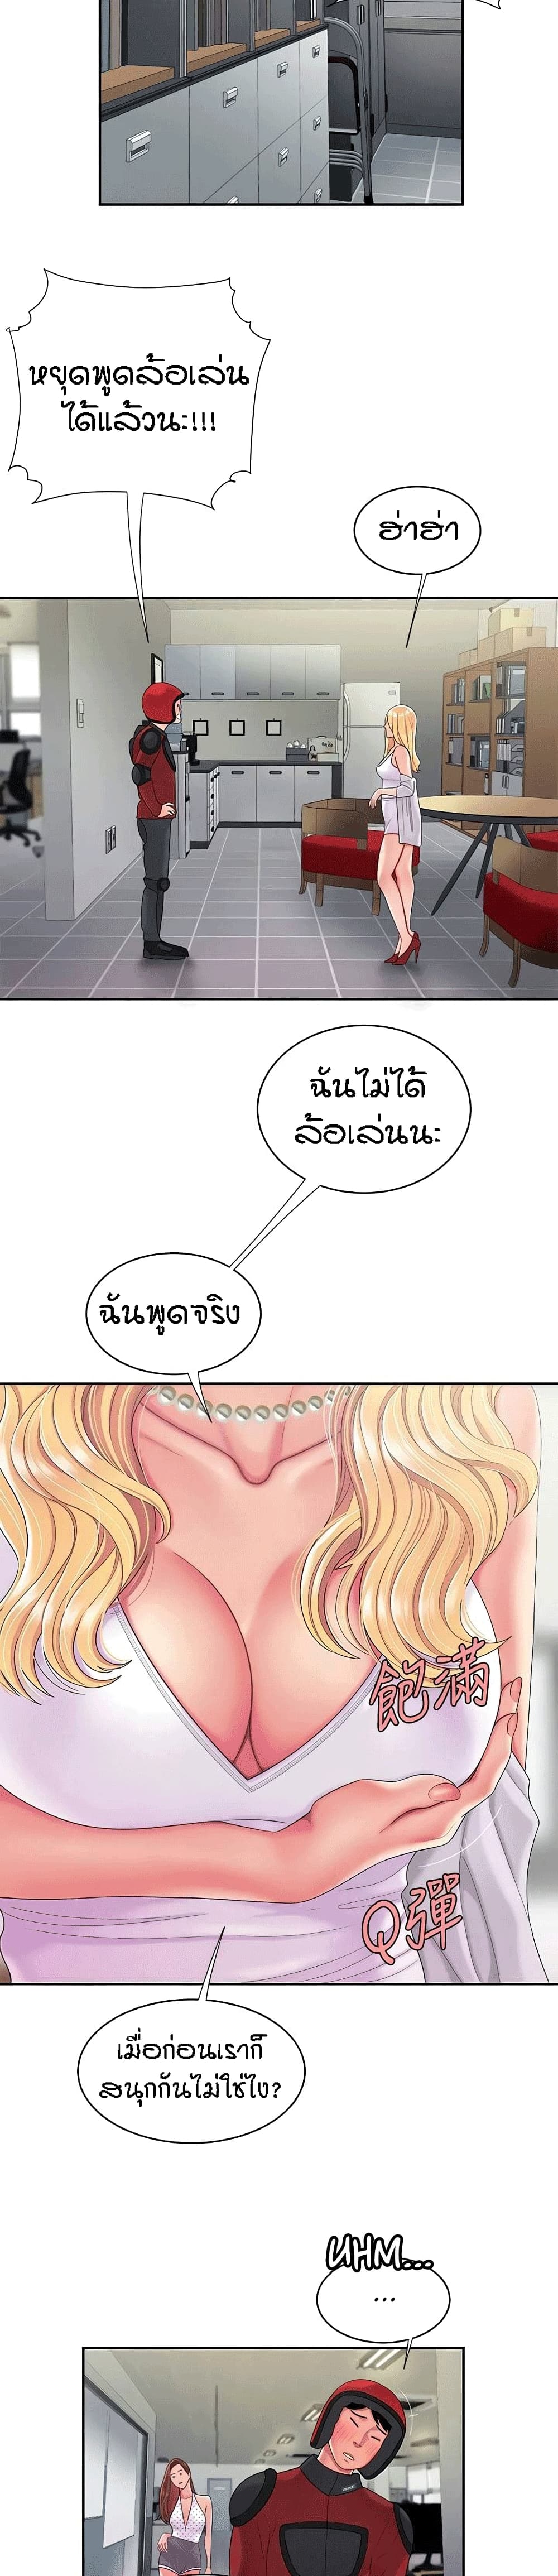 Delivery Man 55-ตอนจบ